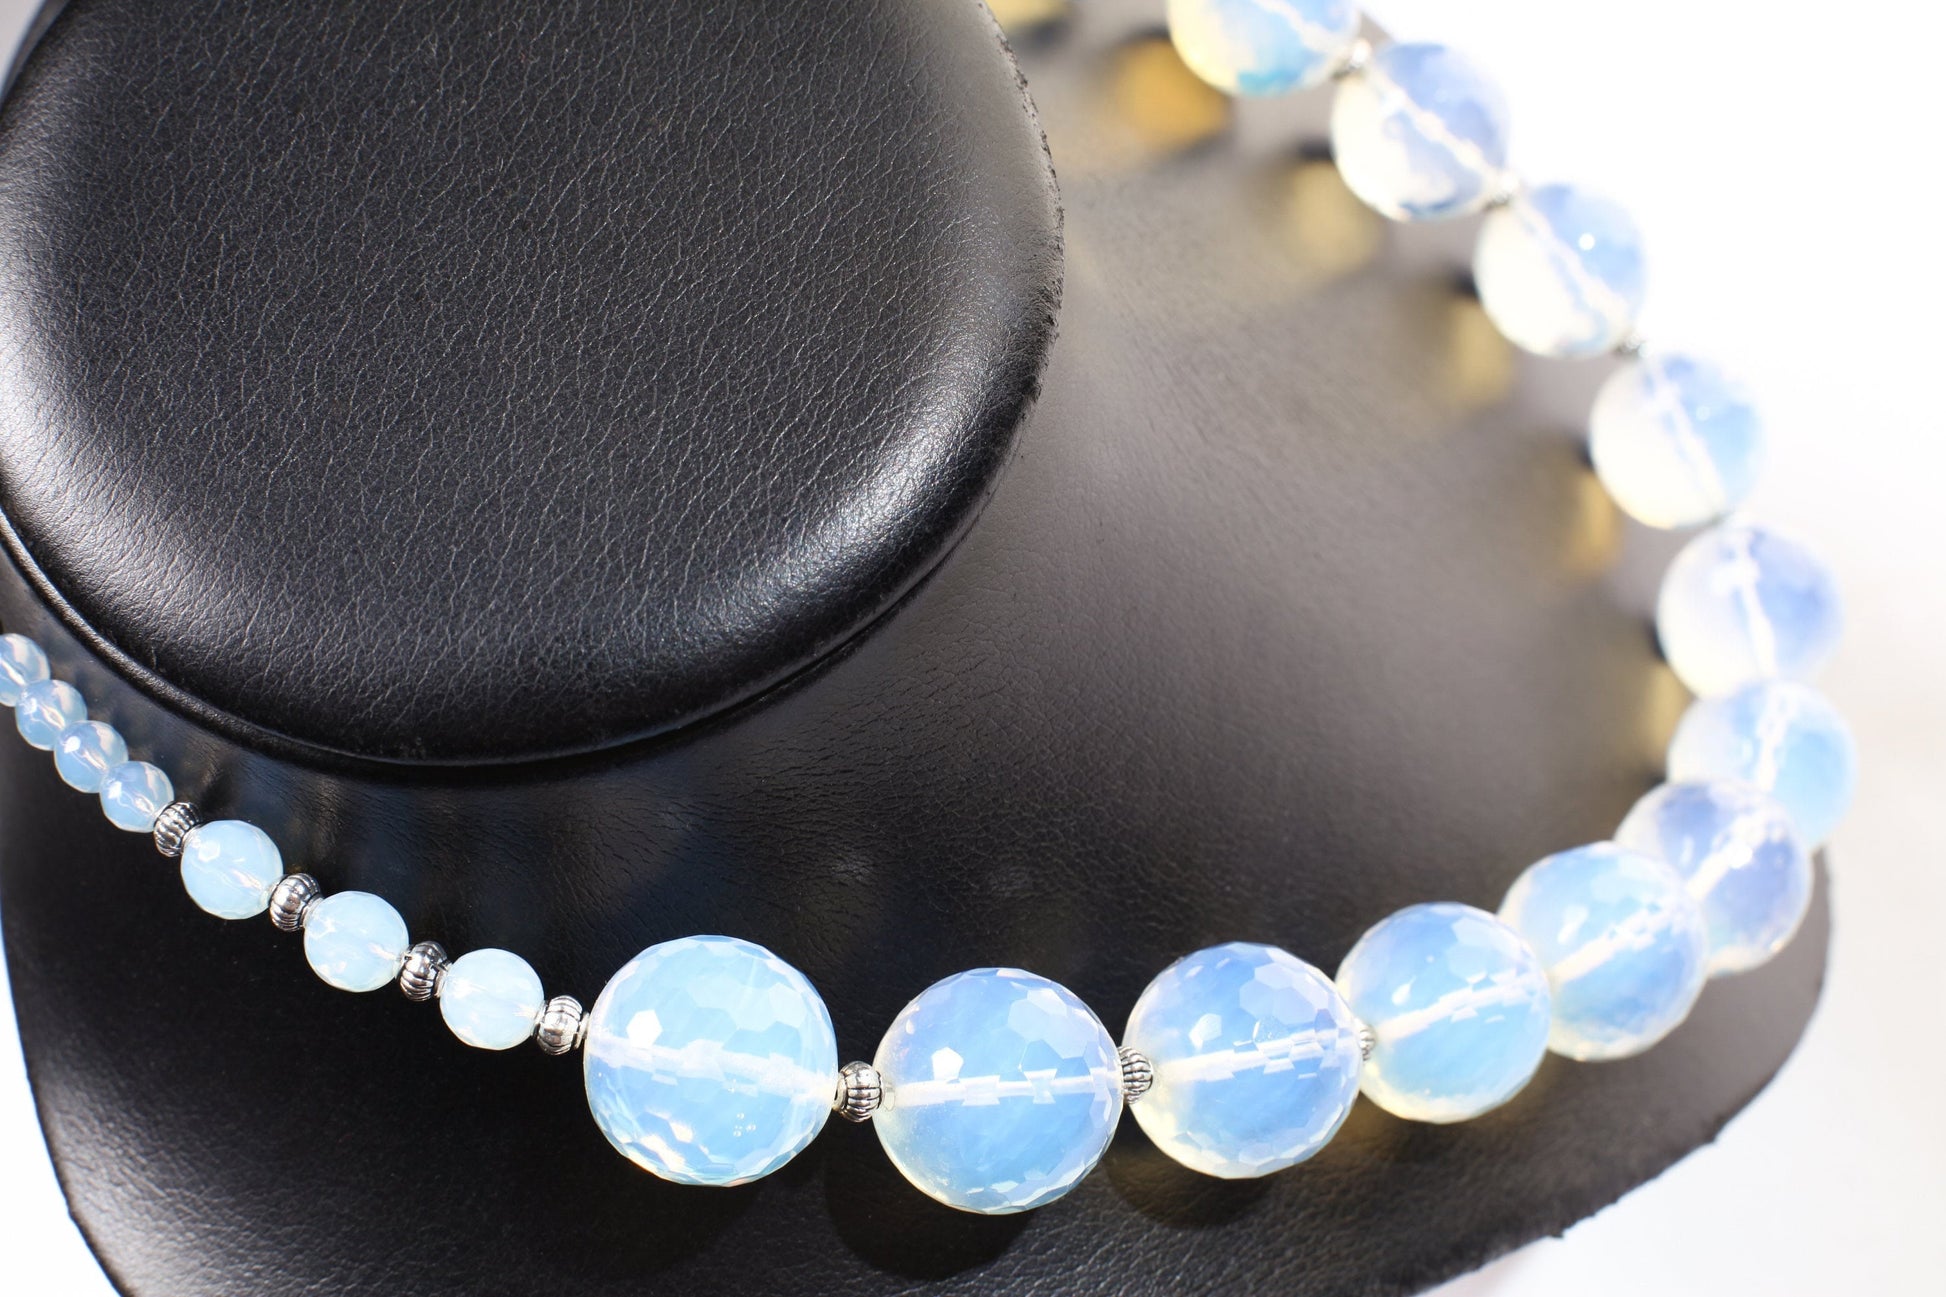 Opalite 18mm Faceted Round AAA quality with 6mm Faceted Opalite and Bali Spacer Beads 21.5&quot; Necklace